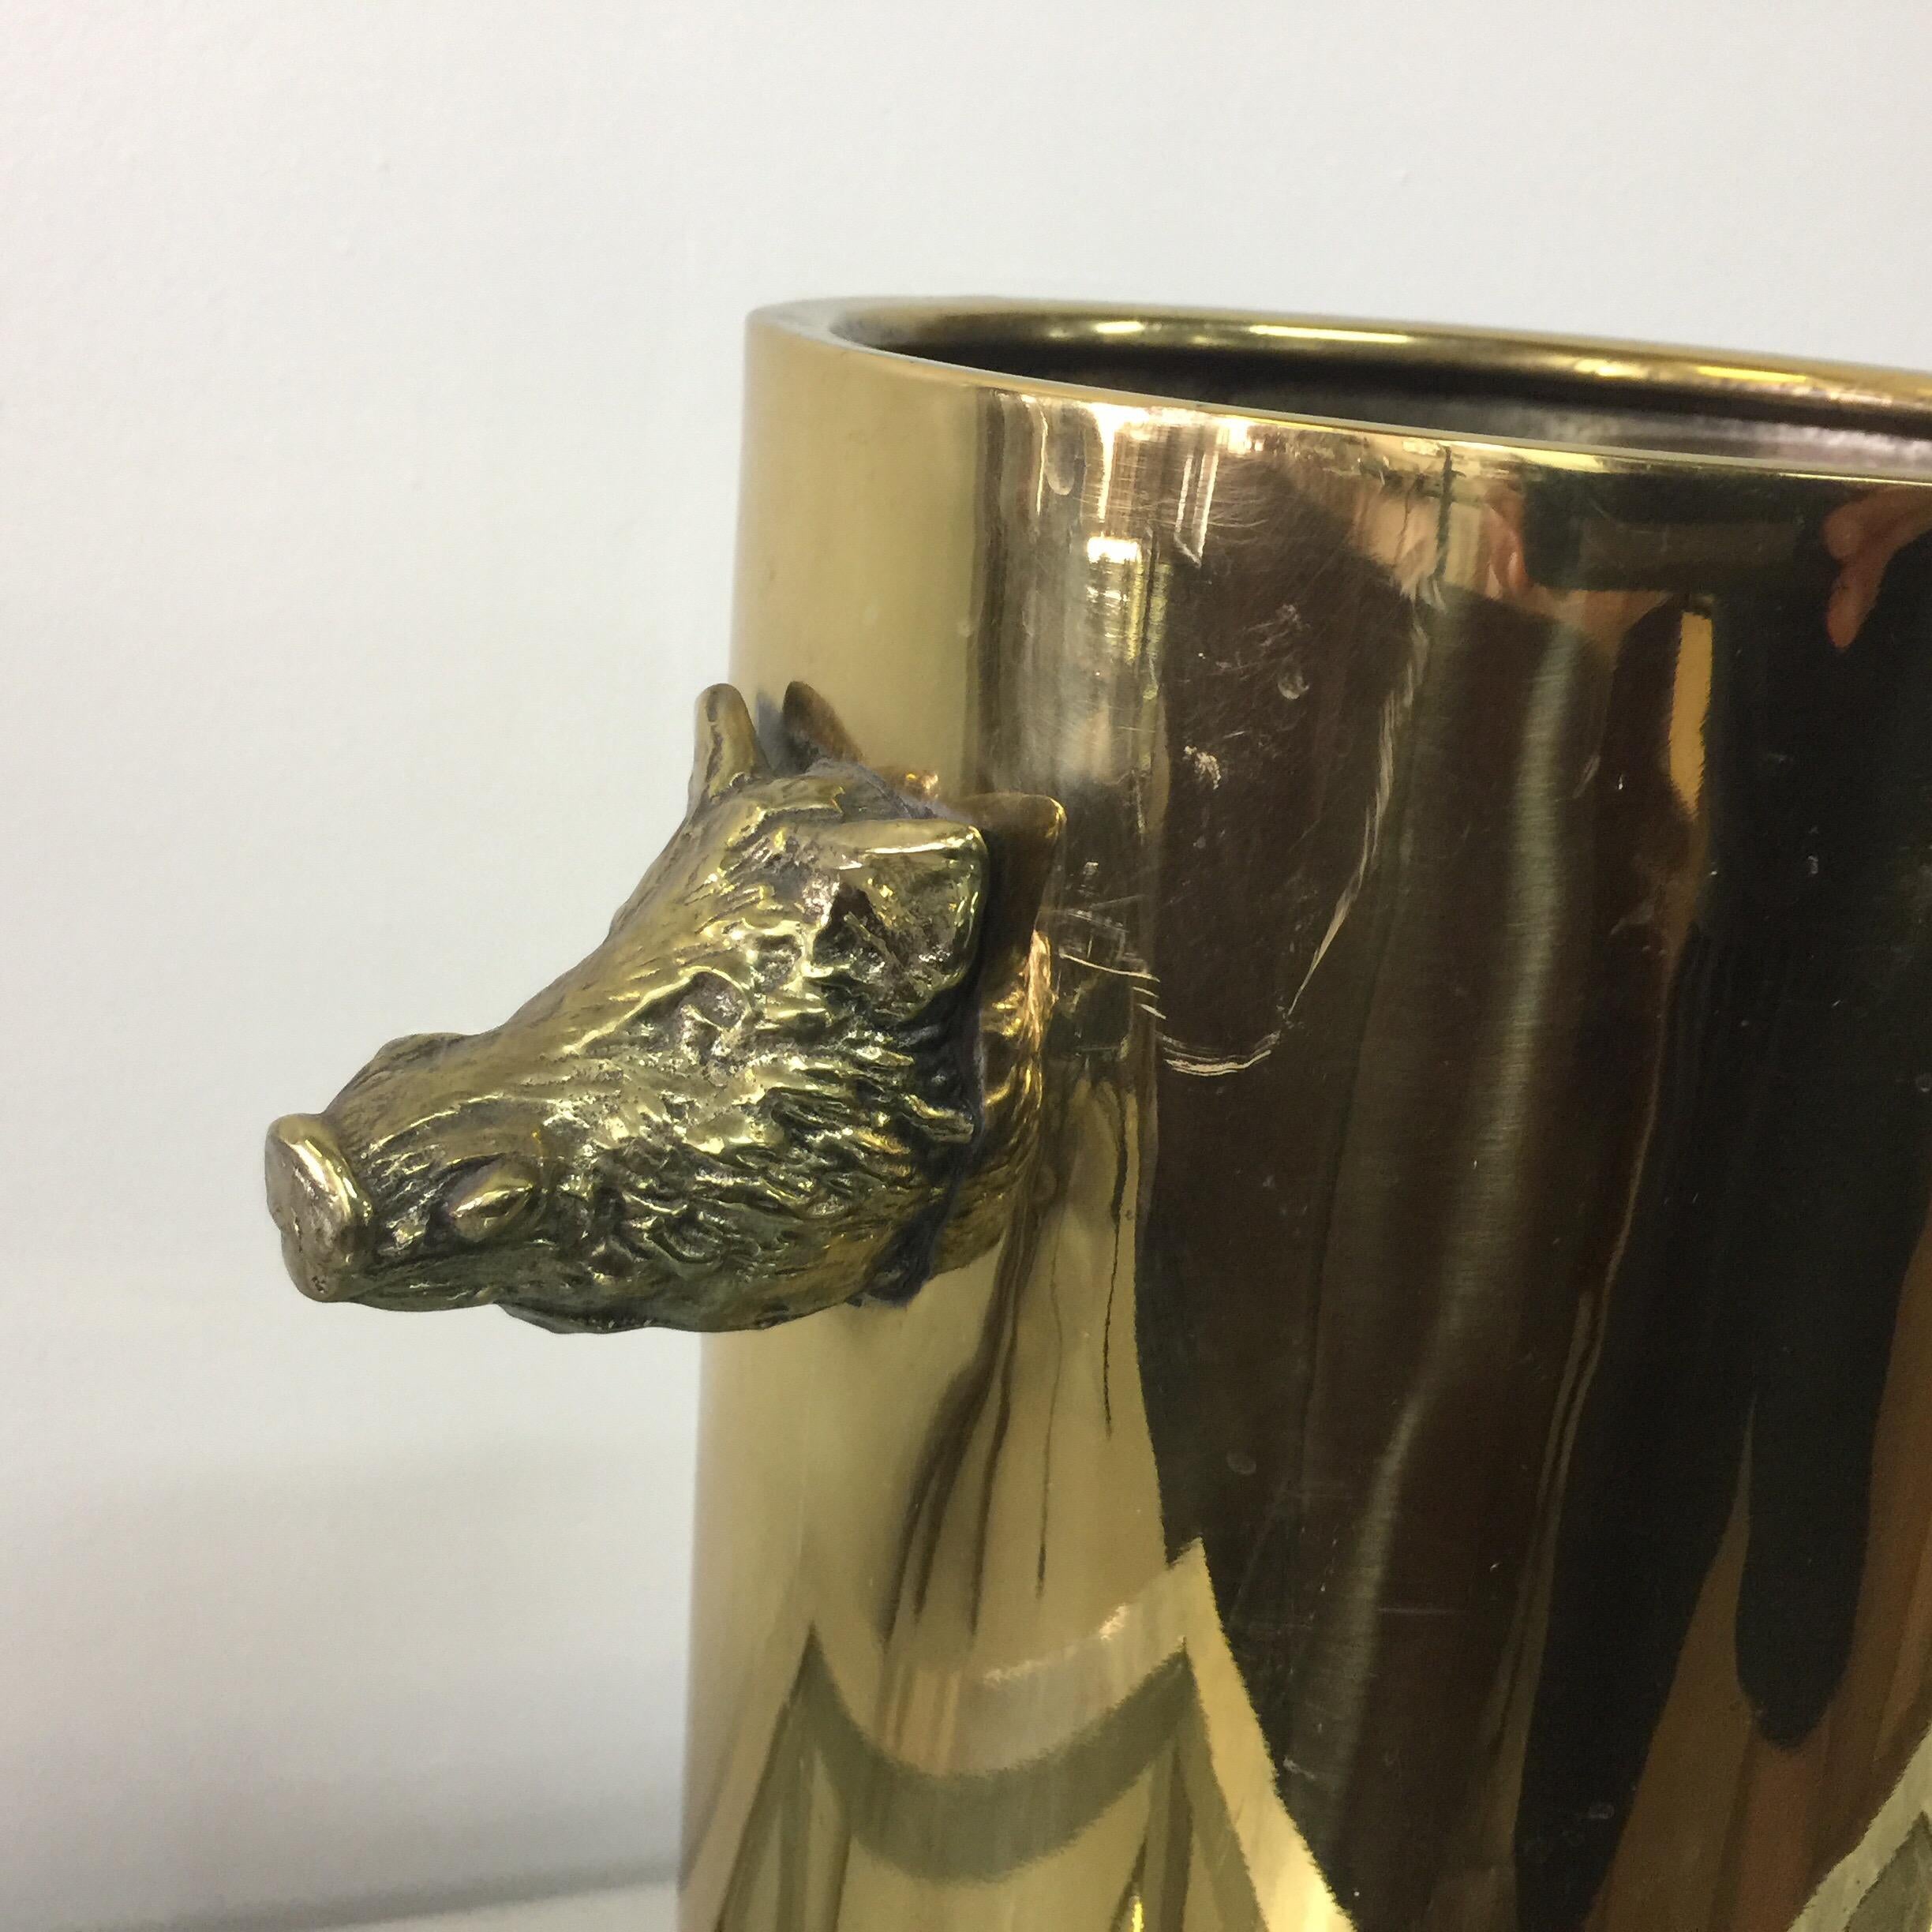 Beautifully detailed boars heads adornment on brass cylinder vessel for umbrellas.